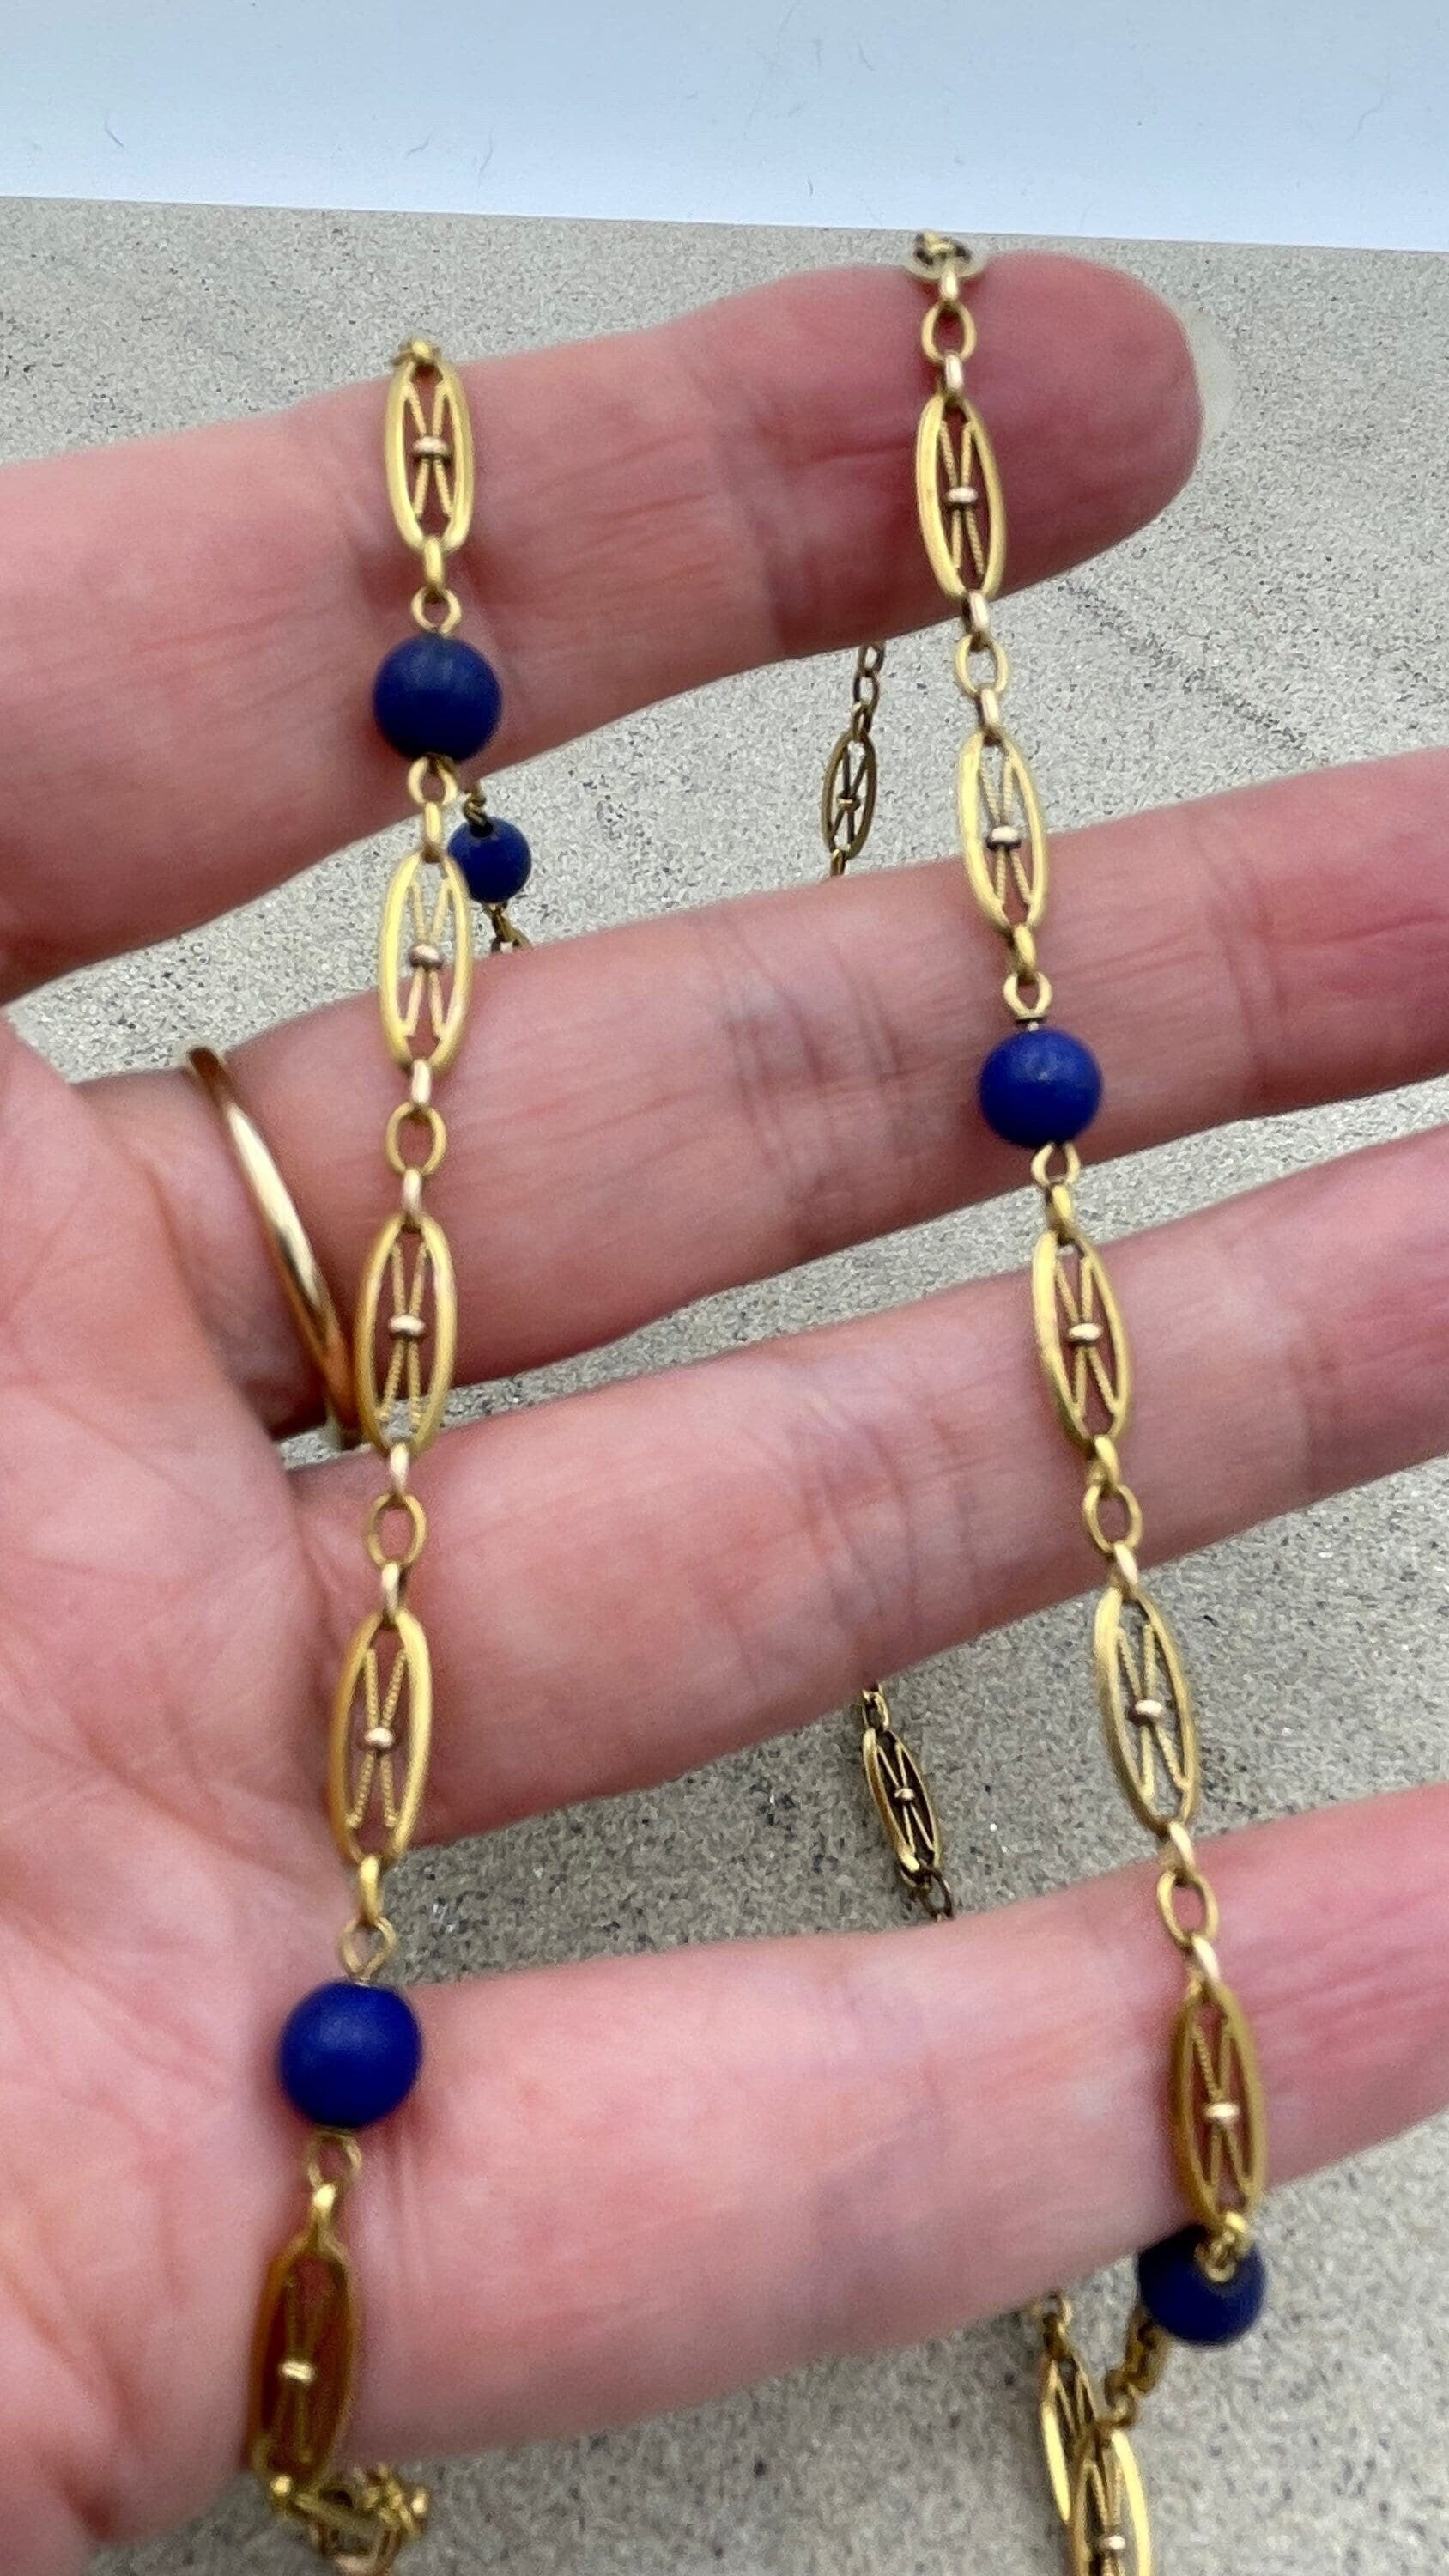 Antique 14ct gold fancy link chain necklace with lapis lazuli bead spacers c1910